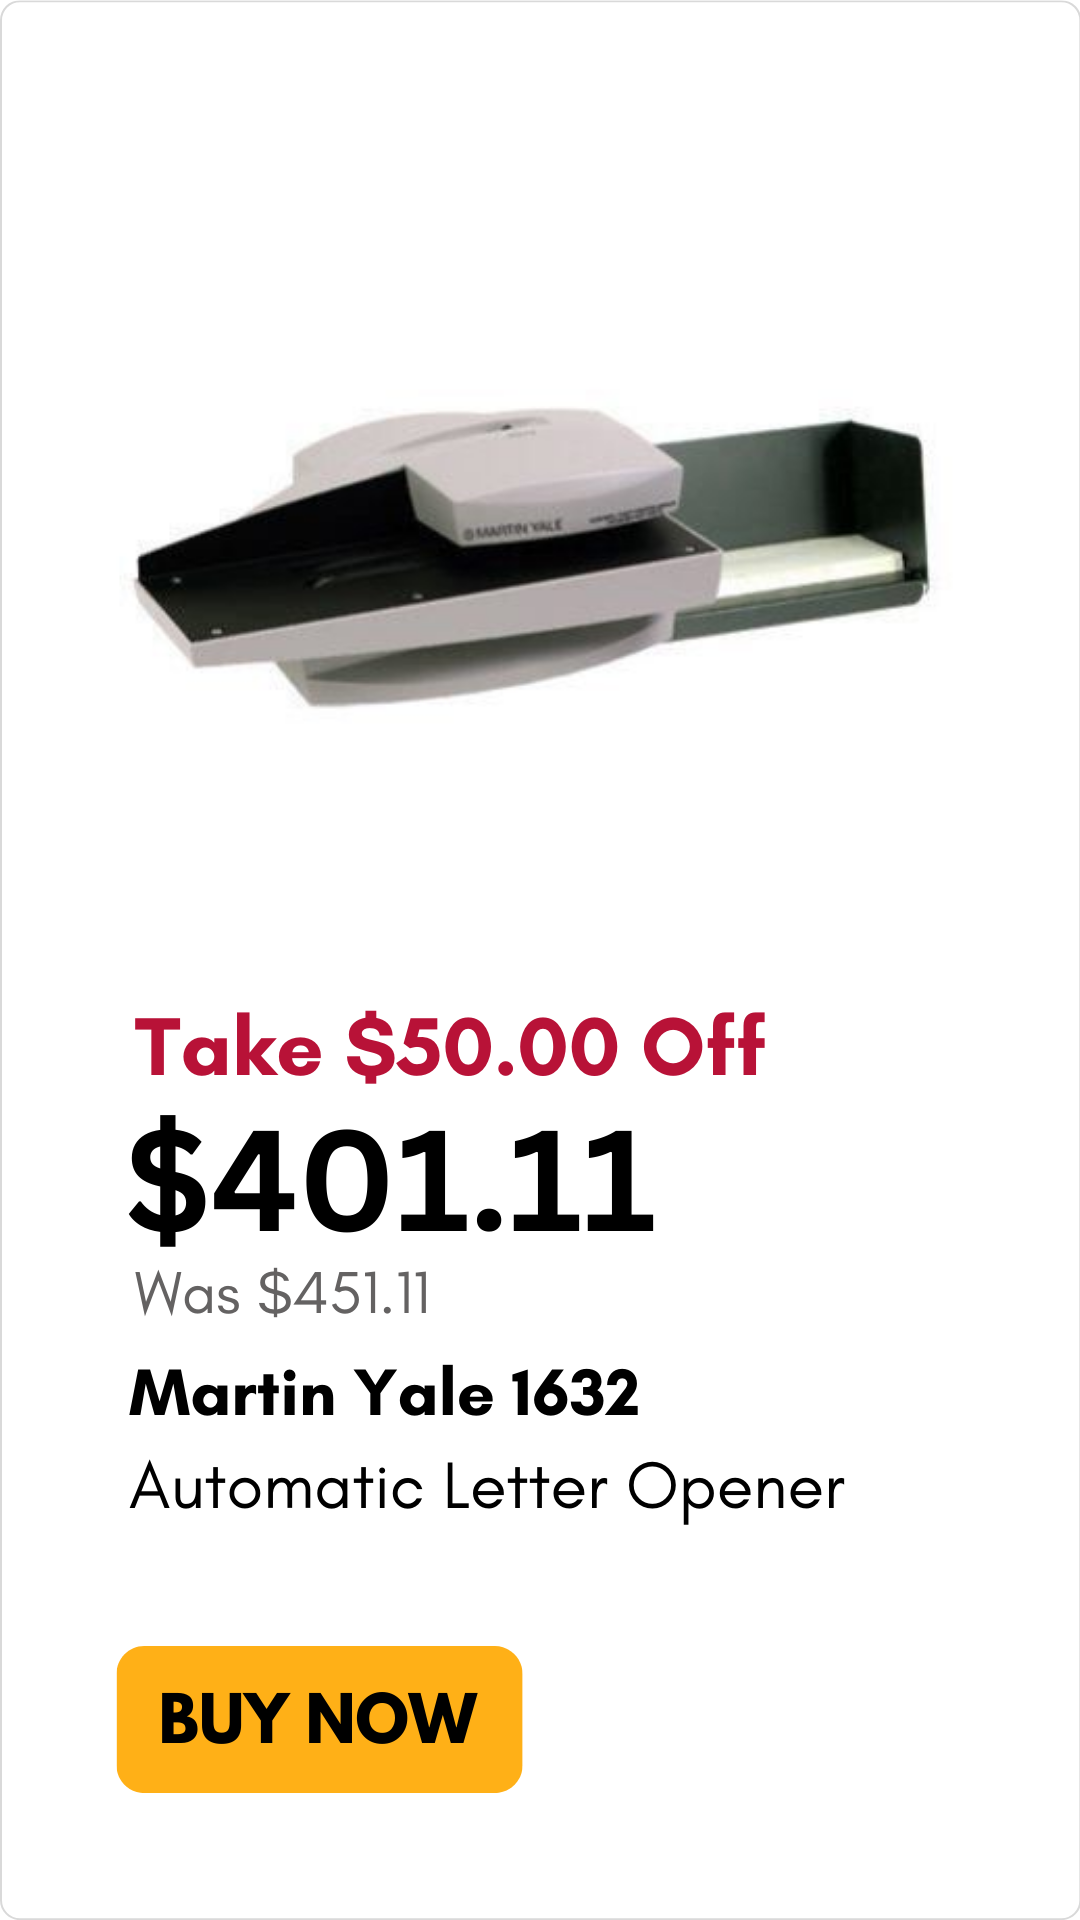 Martin Yale 1632 Automatic Letter Opener on sale for $50 off